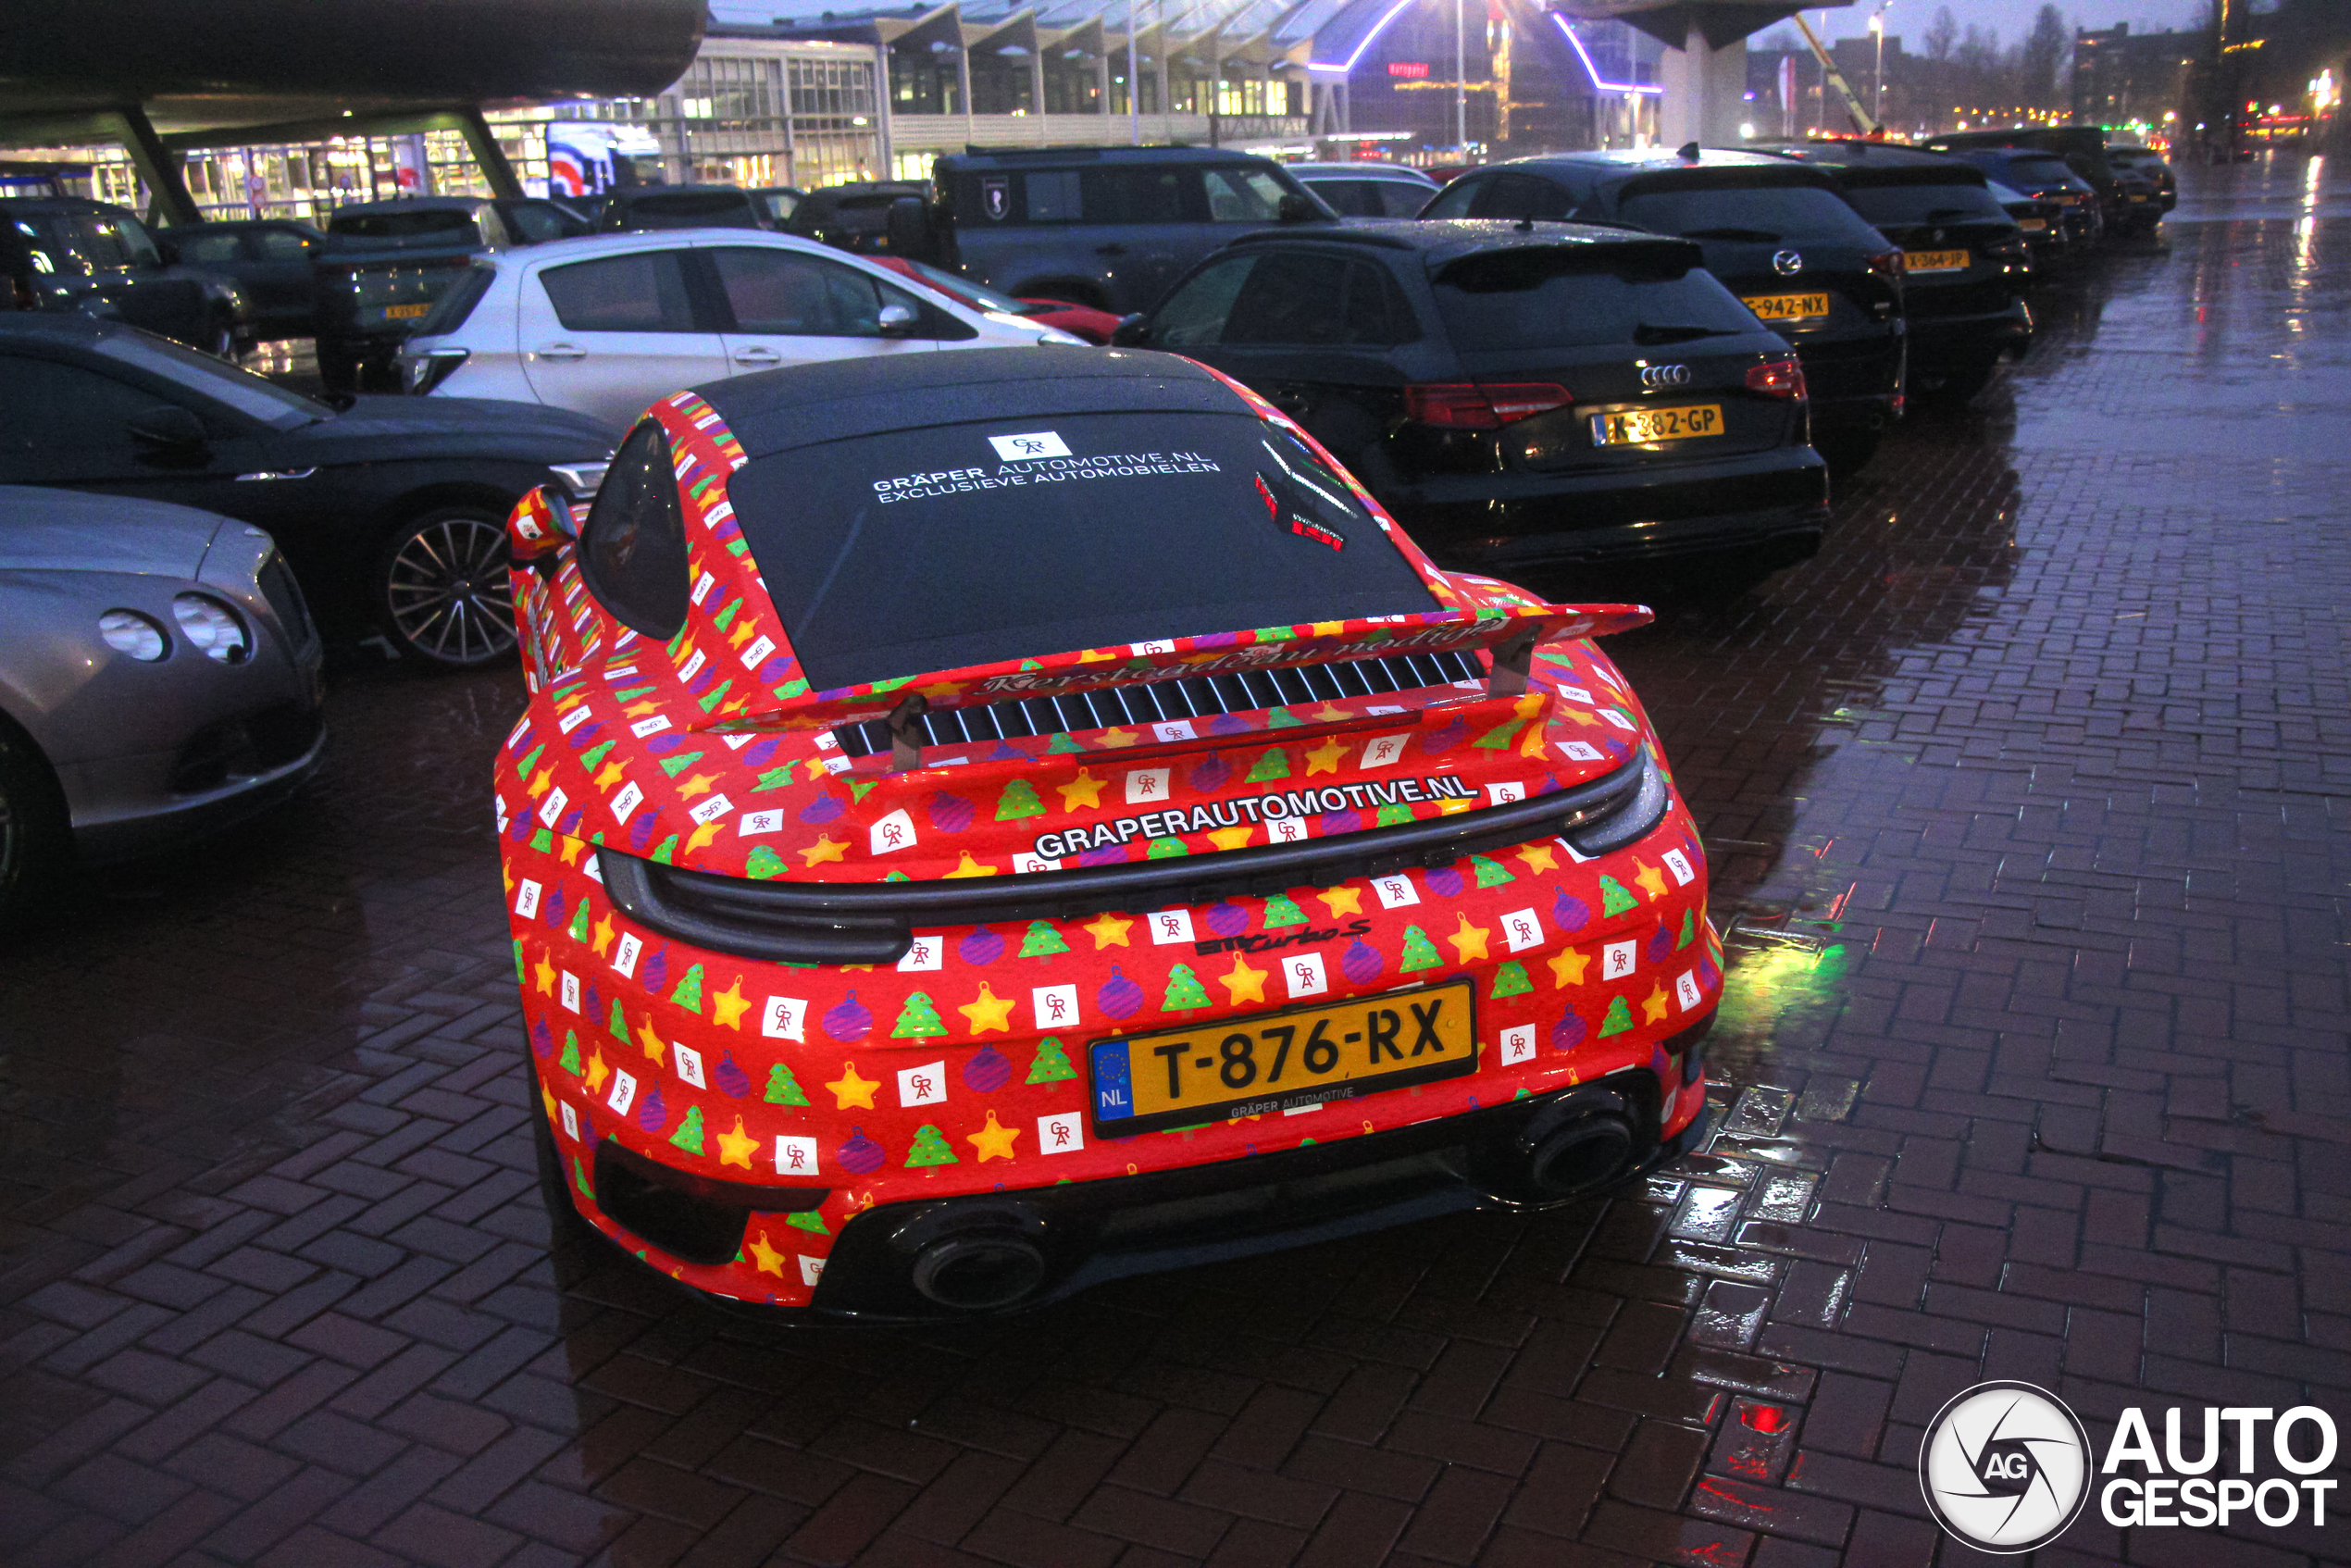 The Santa Claus is driving a Porsche 992 Turbo S this year.